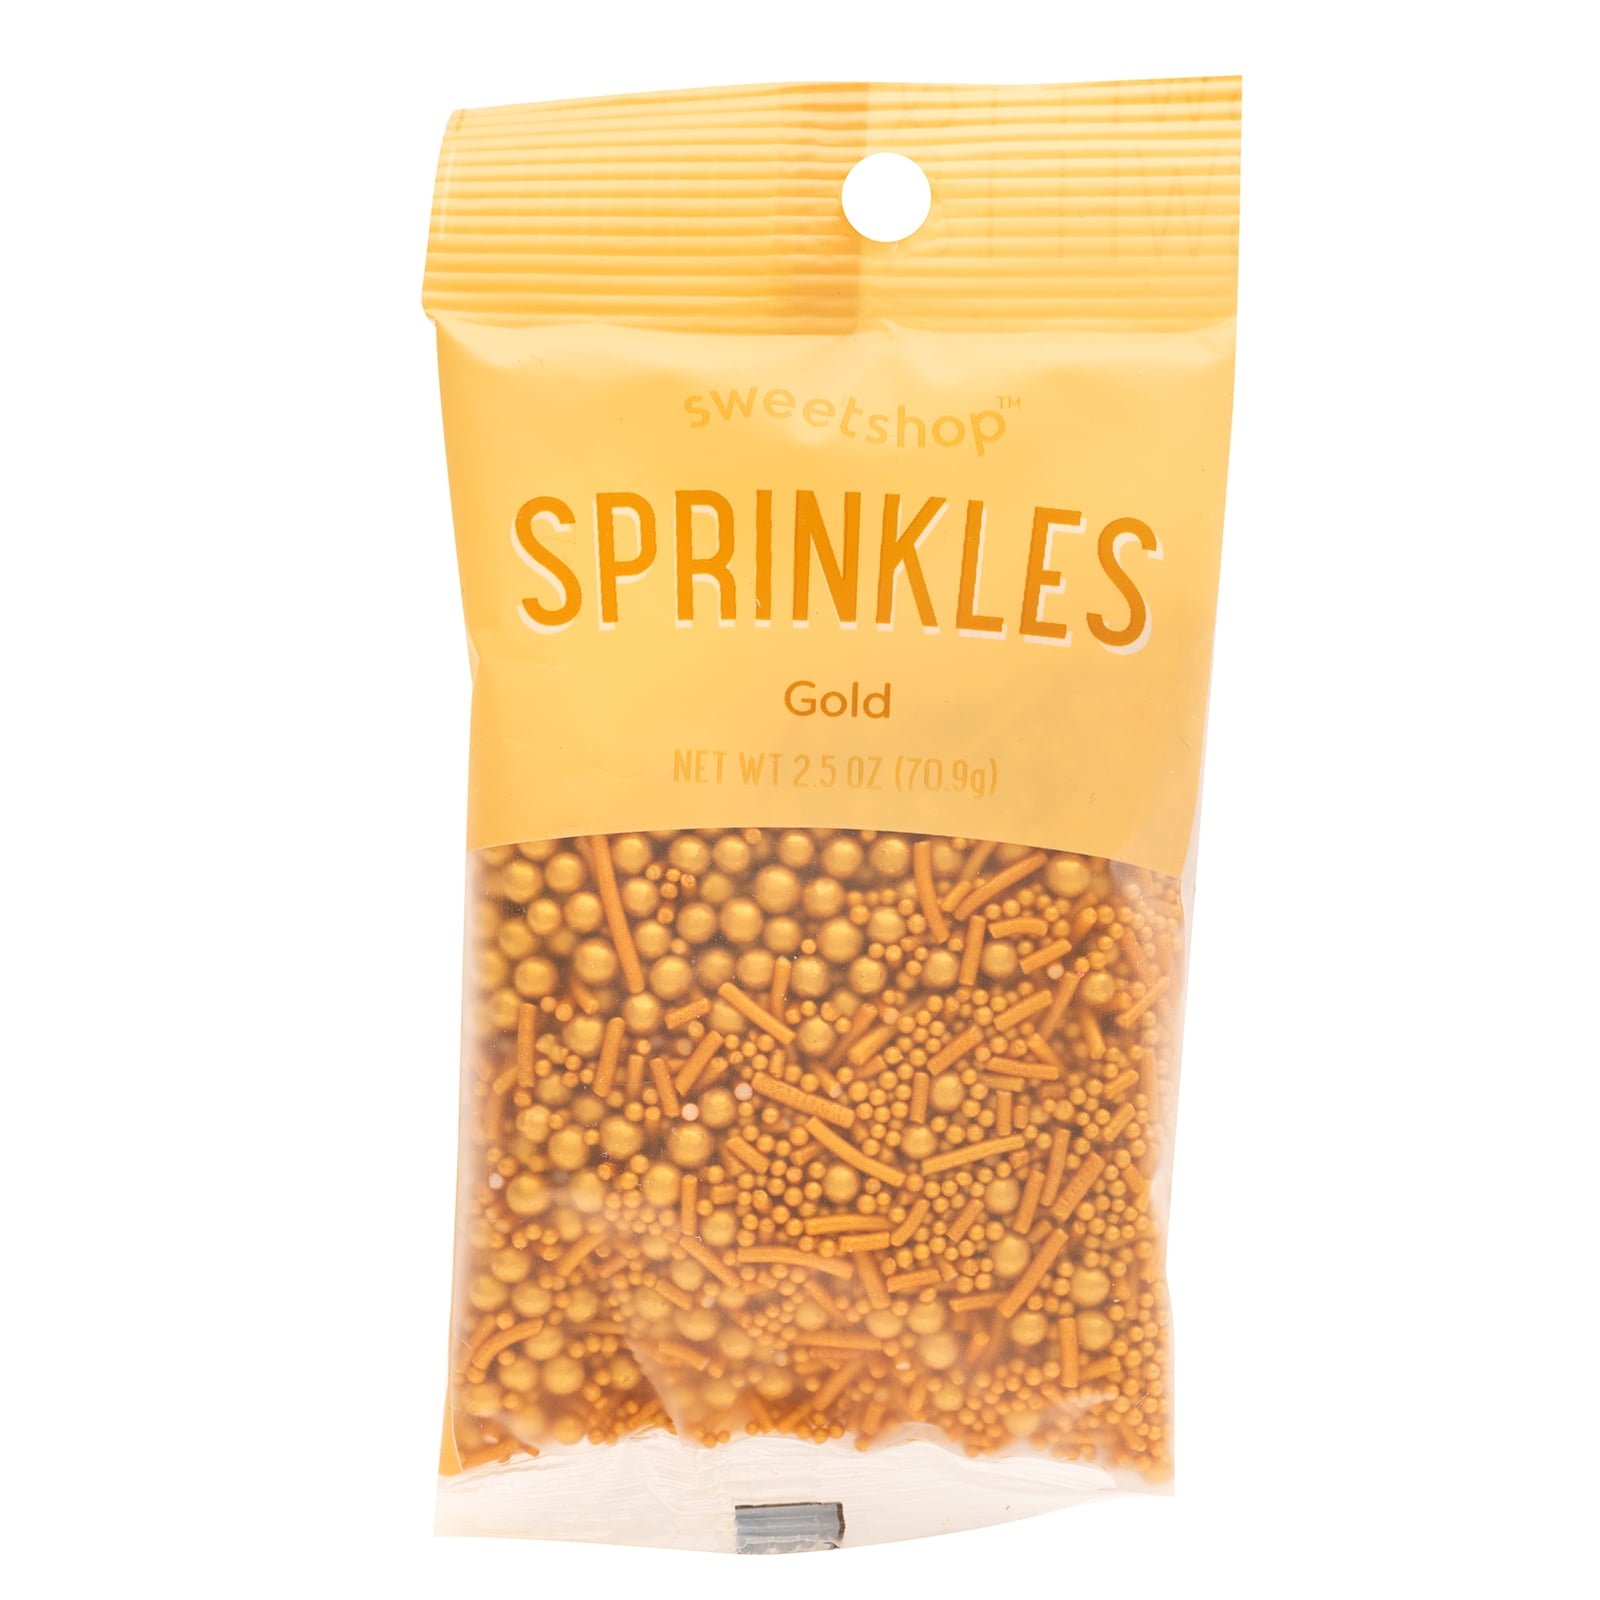 Sweetshop Sprinkle Mix Gold Mix 2.5oz - Dessert Toppings 